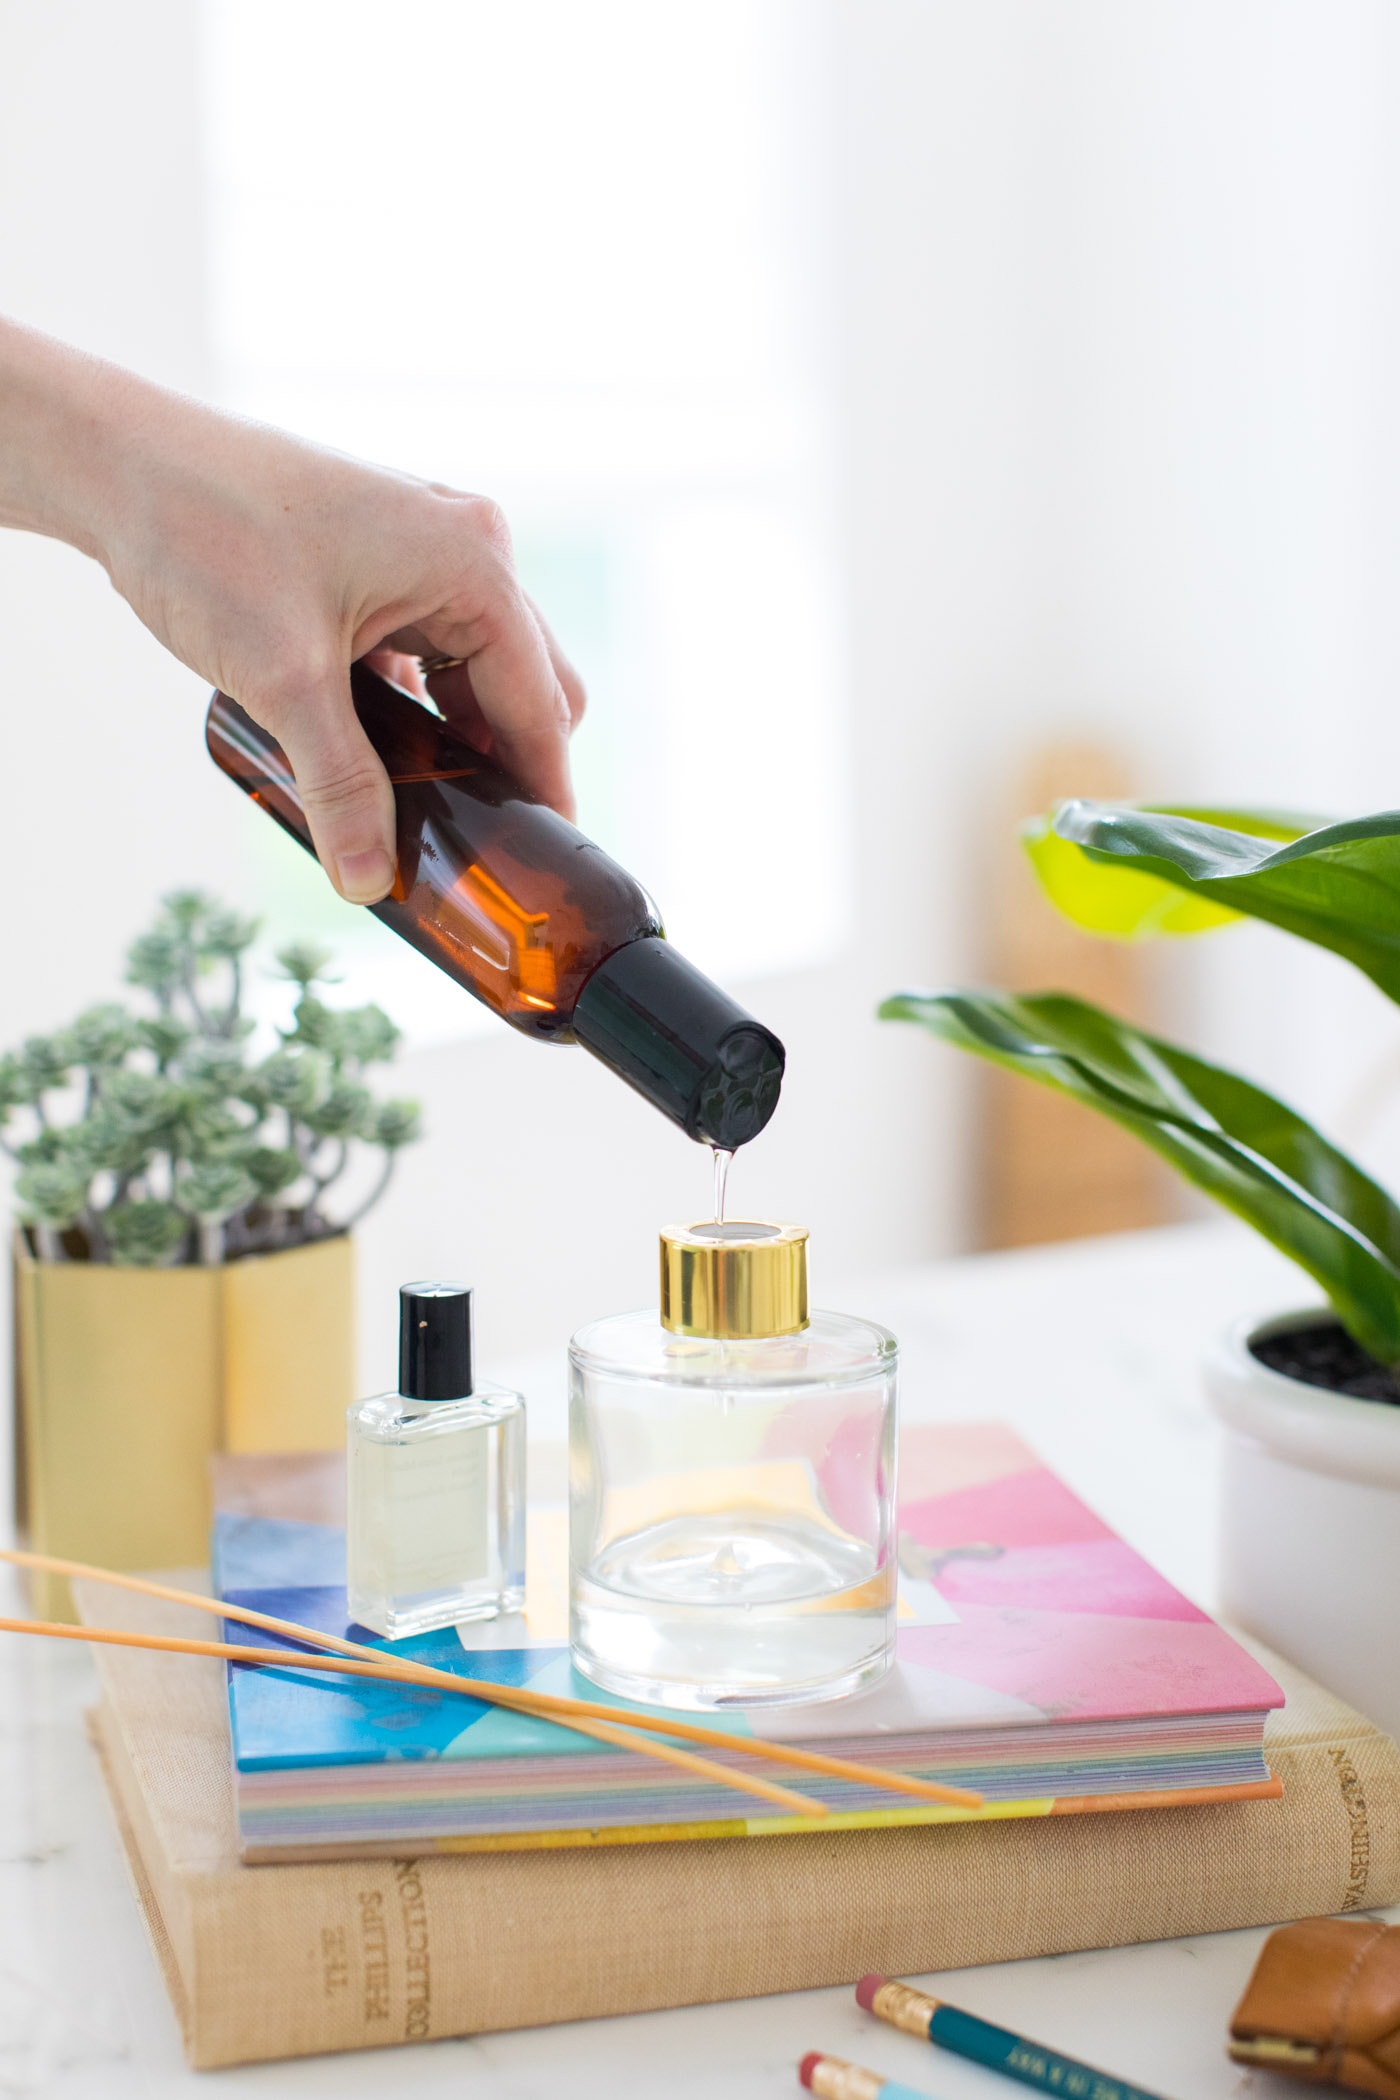 reed diffuser - photo of pouring essential oils into a diffuser bottle